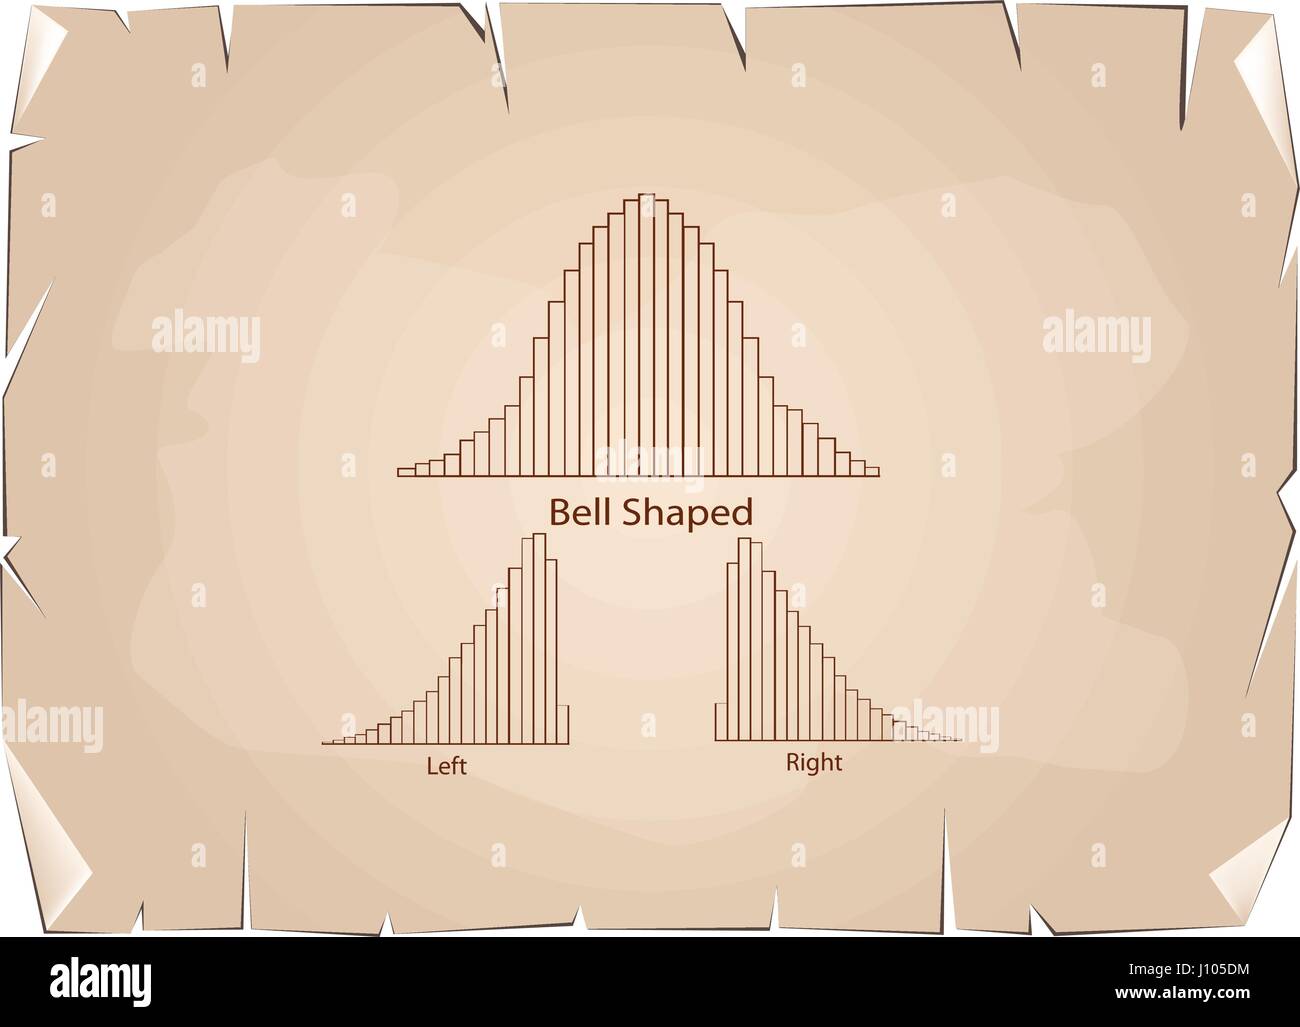 Business and Marketing Concepts, Collection of Positive and Negative Distribution Curve or Normal Distribution and Not Normal Distribution Curve on Ol Stock Vector